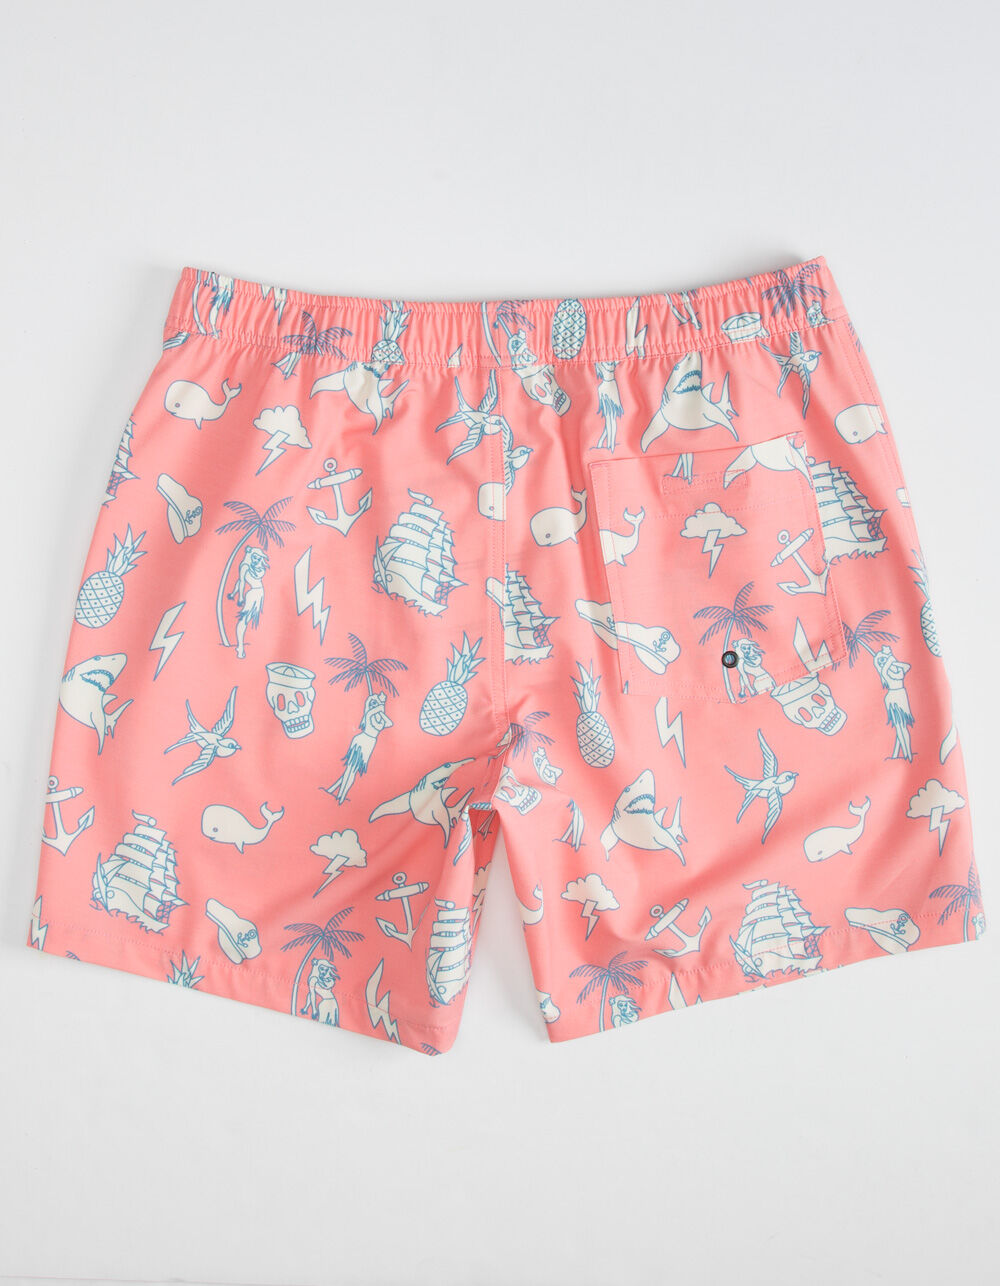 PUBLIC ACCESS Seabound Mens Shorts - CORAL | Tillys